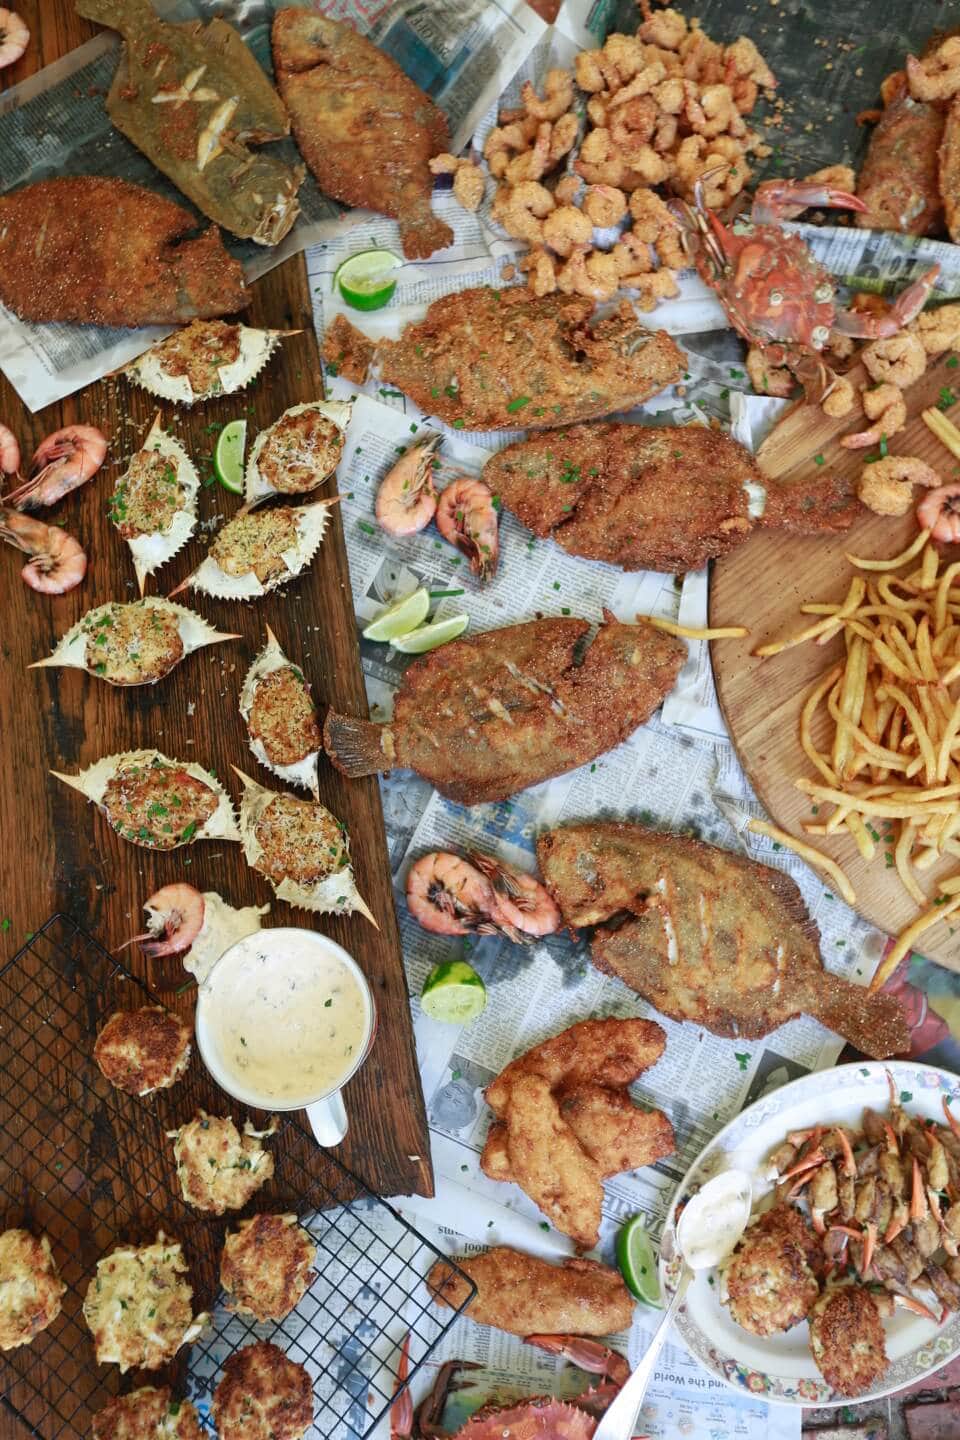 Assortment of fried seafood, fish fry after catching shrimp crab and fish at the beach